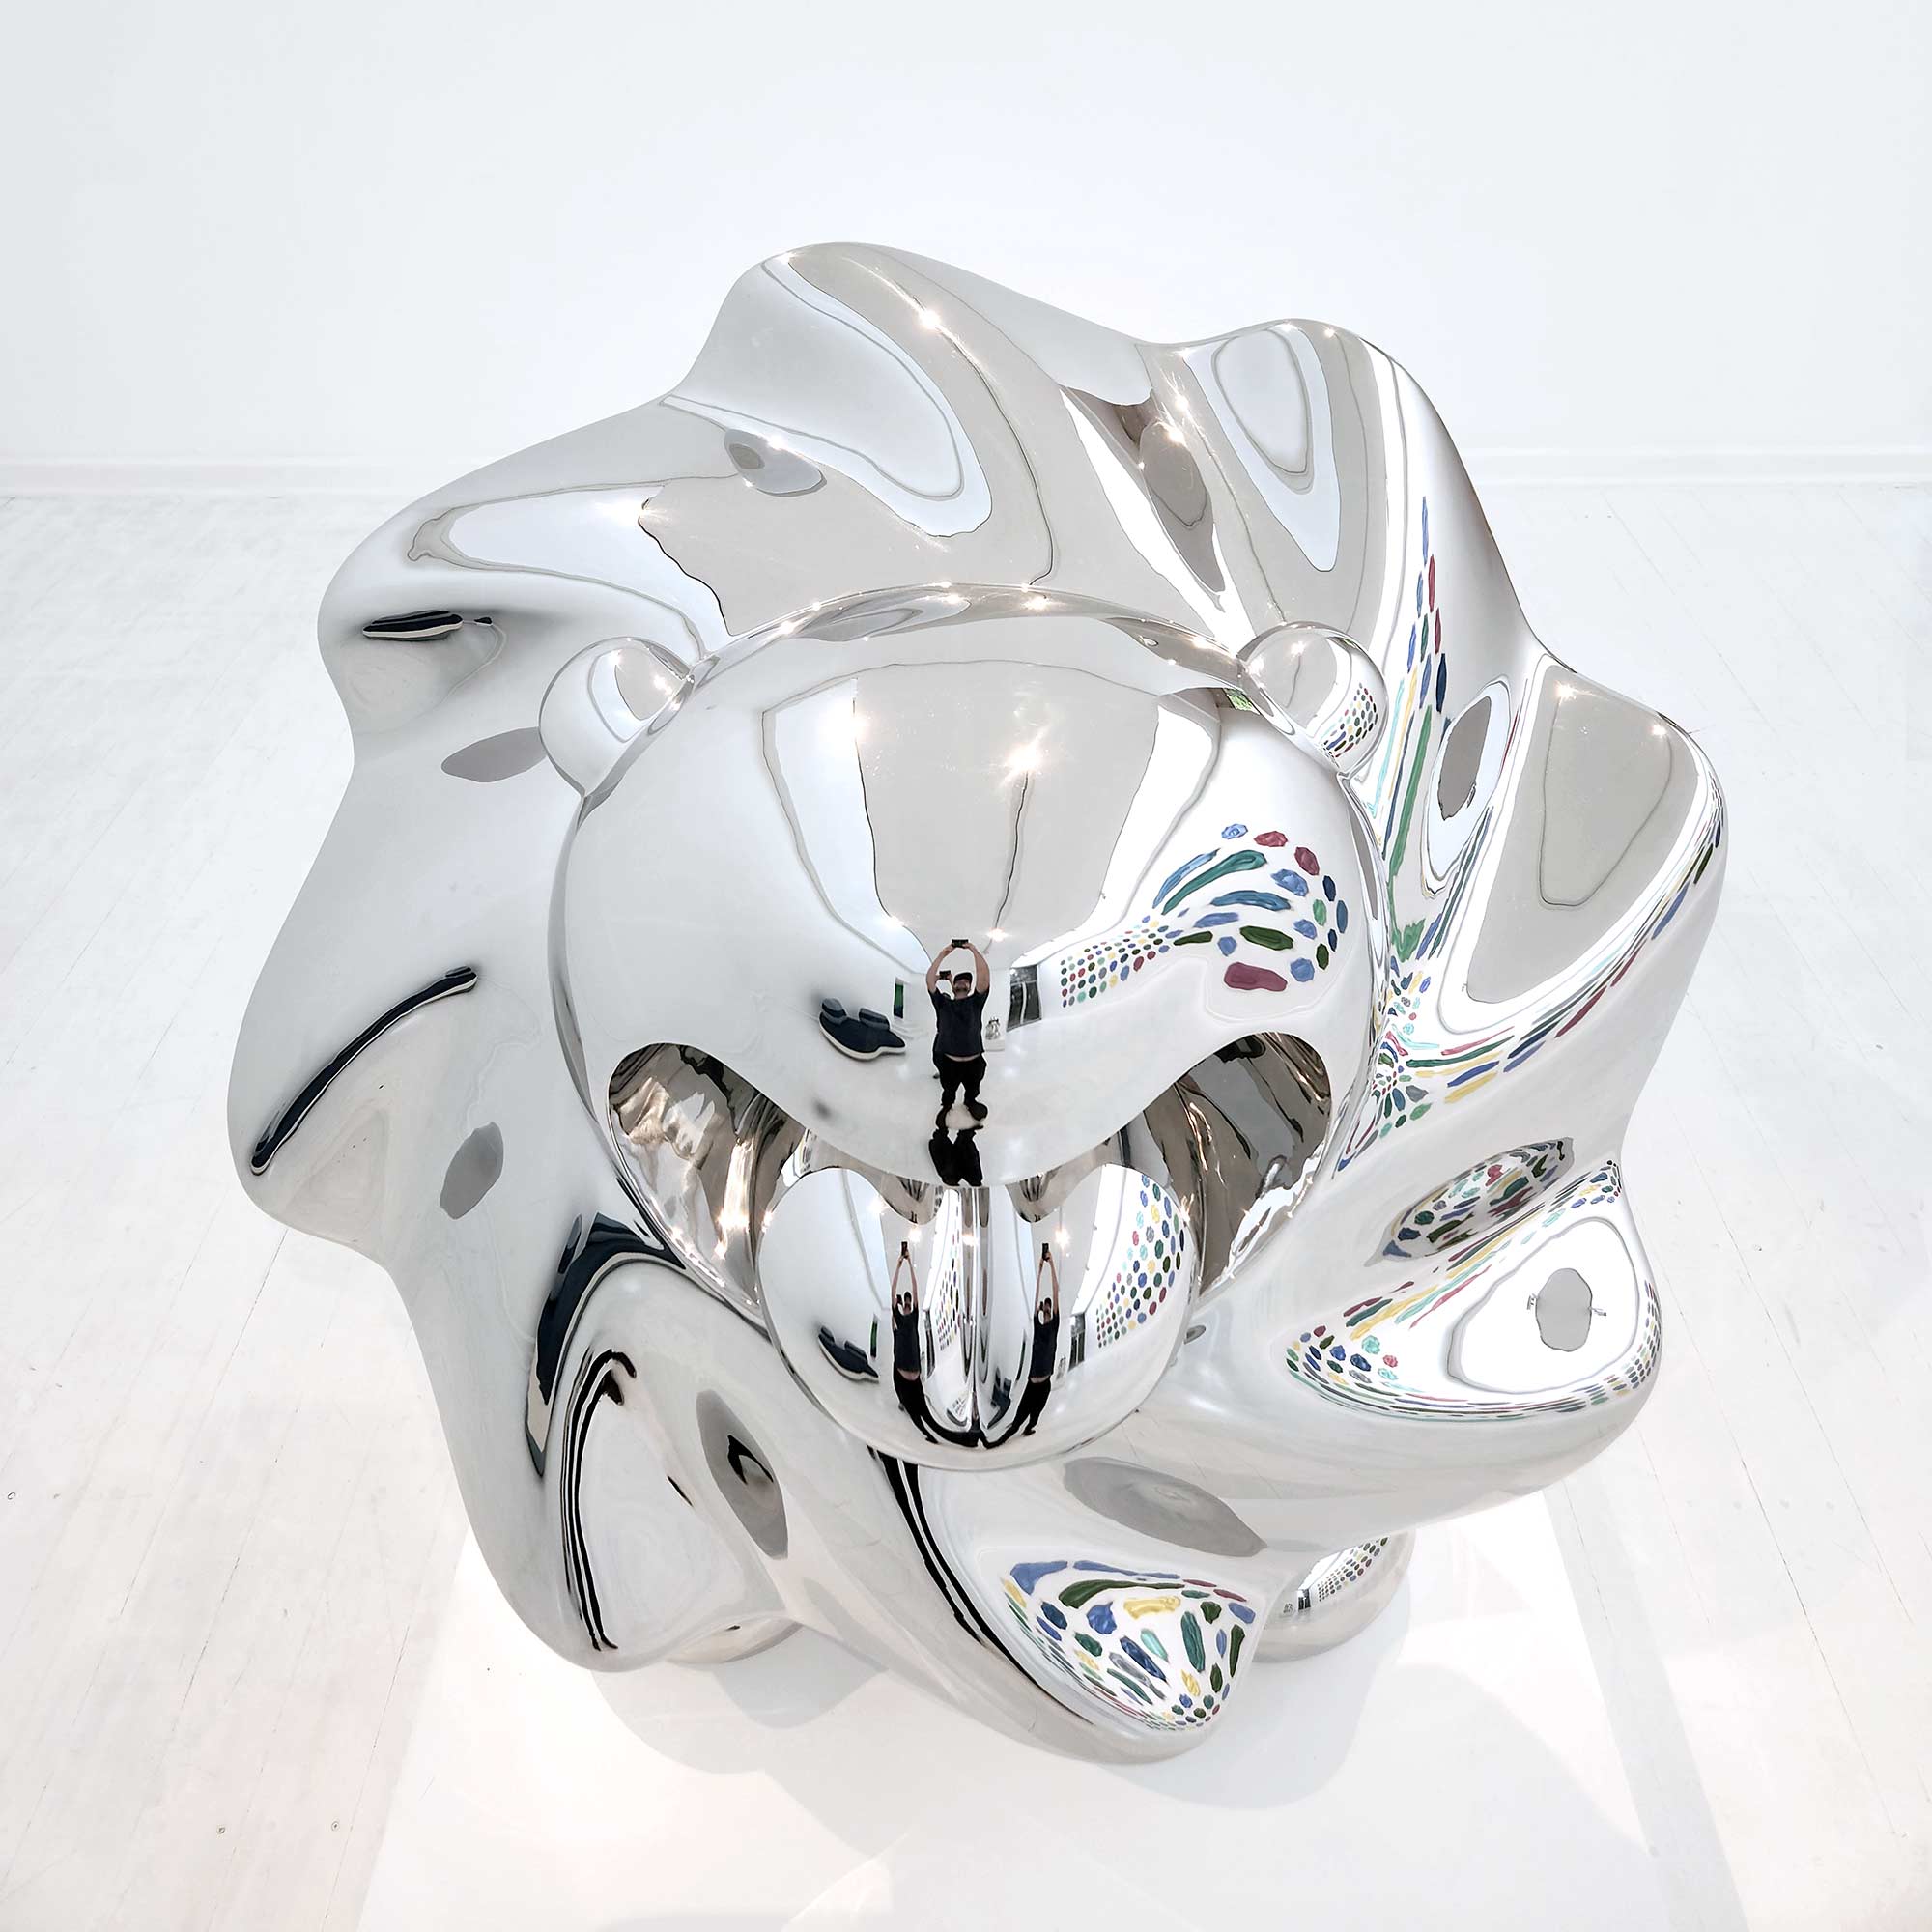 Lions breath polished stainless steel sculpture large size by Ferdi B Dick , top face view